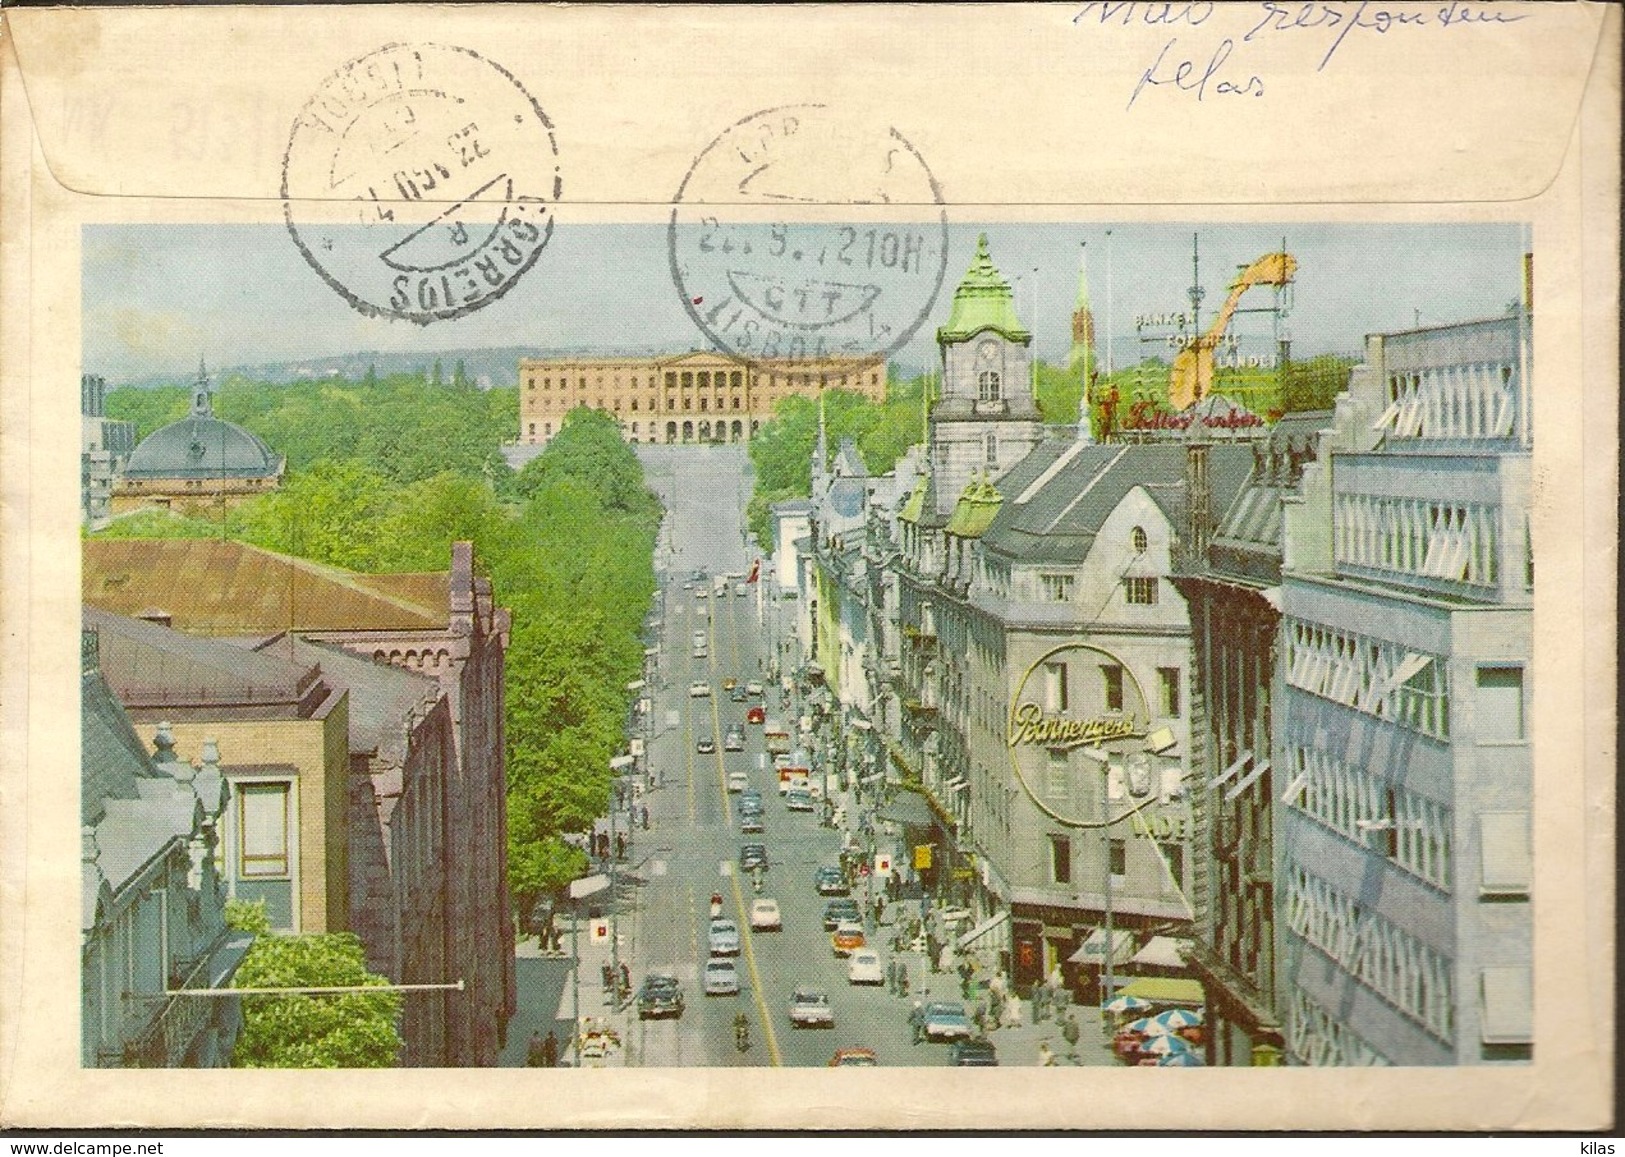 NORGE 1972 Circulated Letter From Oslo To Lisbon - Tarjetas – Máximo